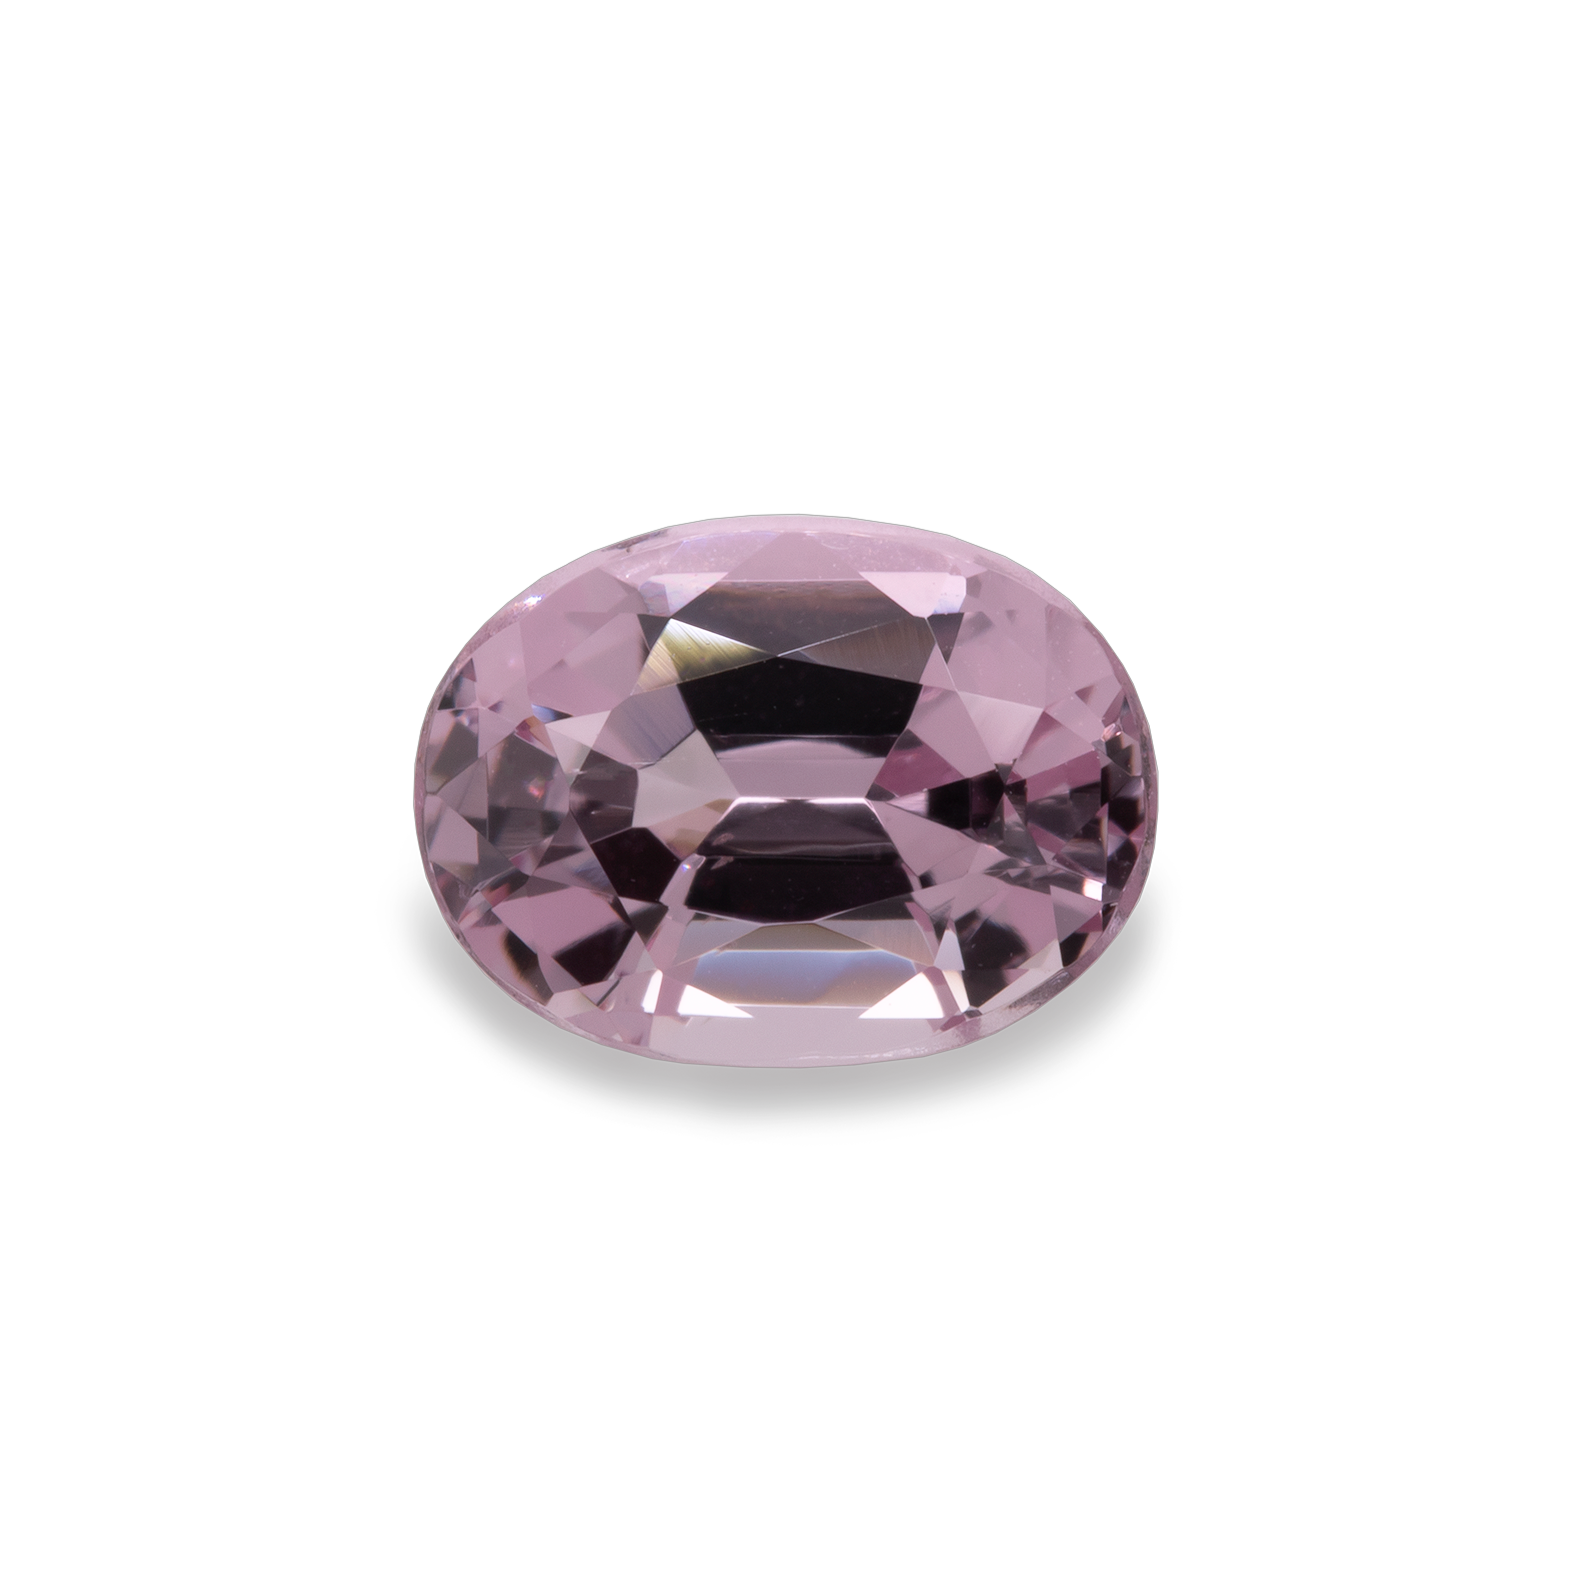 Spinel - pink, oval, 7.9x5.87 mm, 1.49 cts, No. SP70001